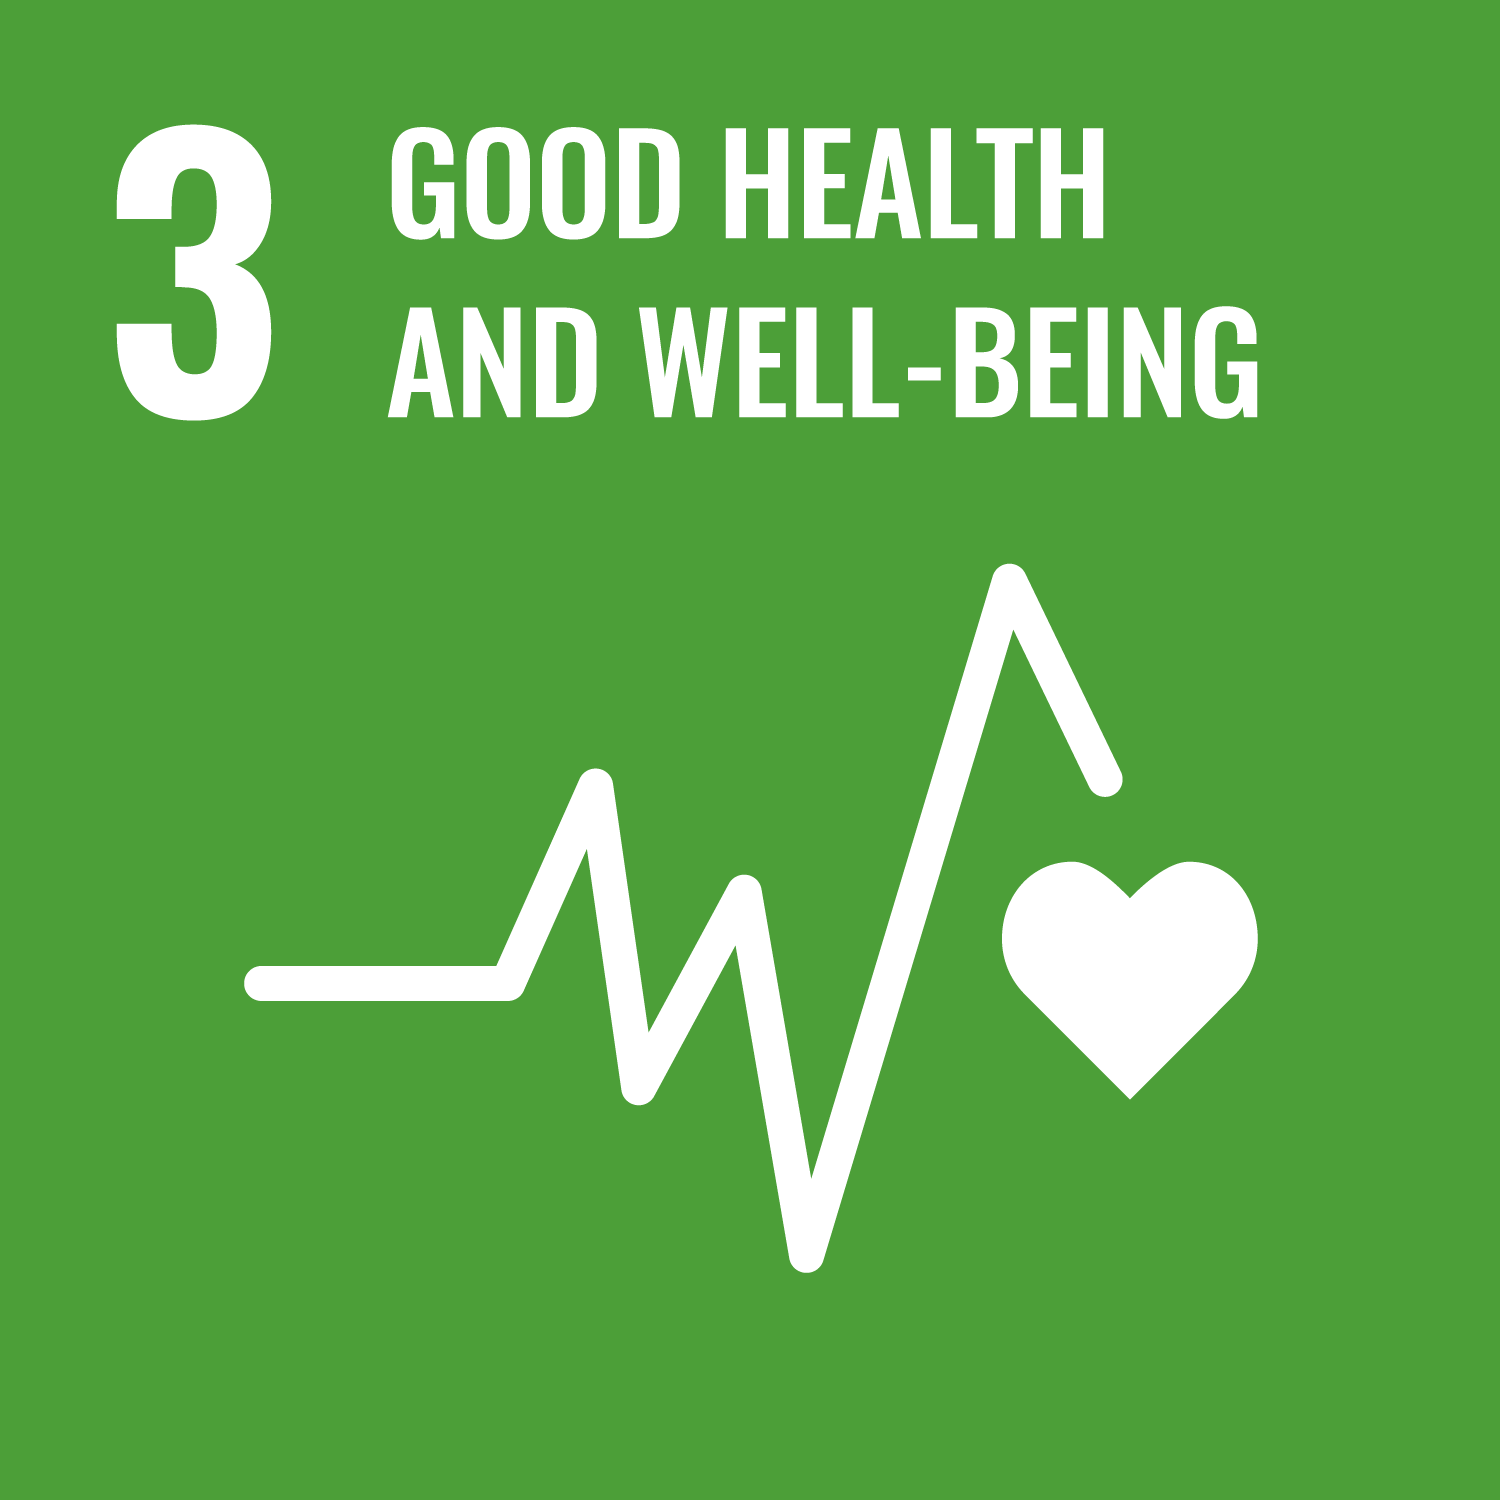 Good health and well-being (SDG-3)